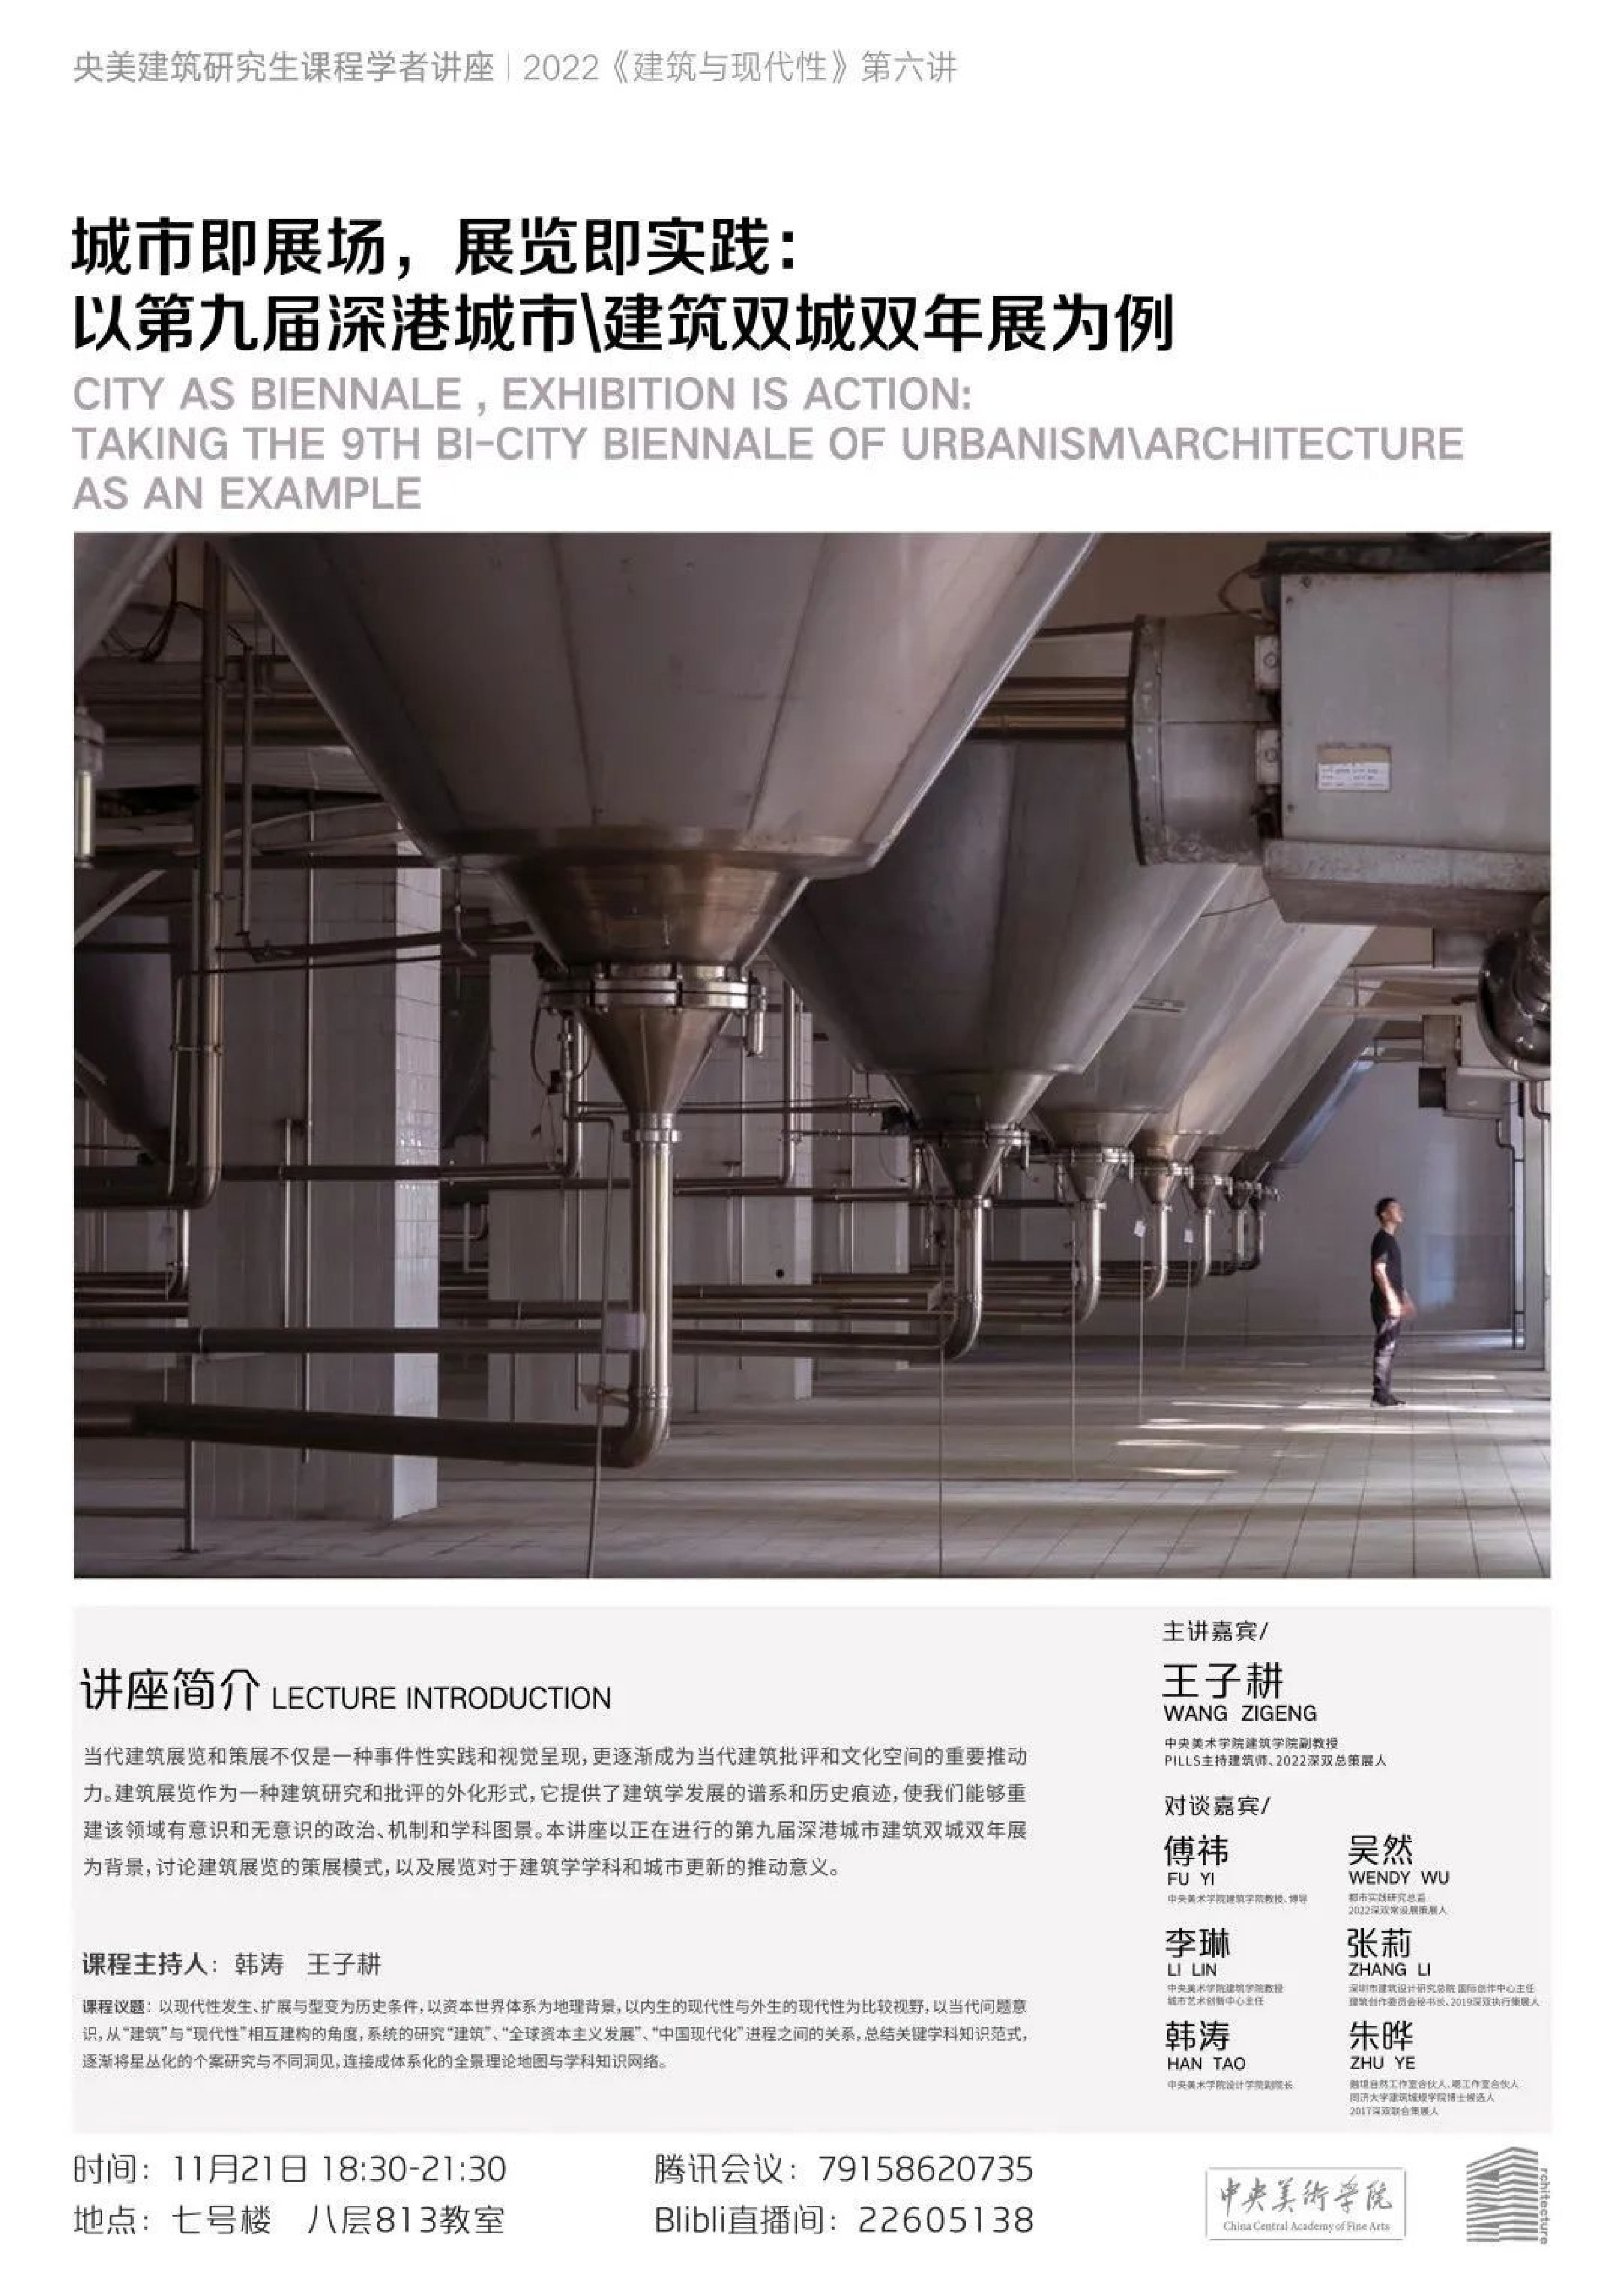 Zigeng Wang was Invited to Give a Lecture on the Sixth Lecture on “Architecture and Modernity" by the Central Academy of Fine Arts in the Autumn of 2022, Titled “City as Biennale, Exhibition is Action"